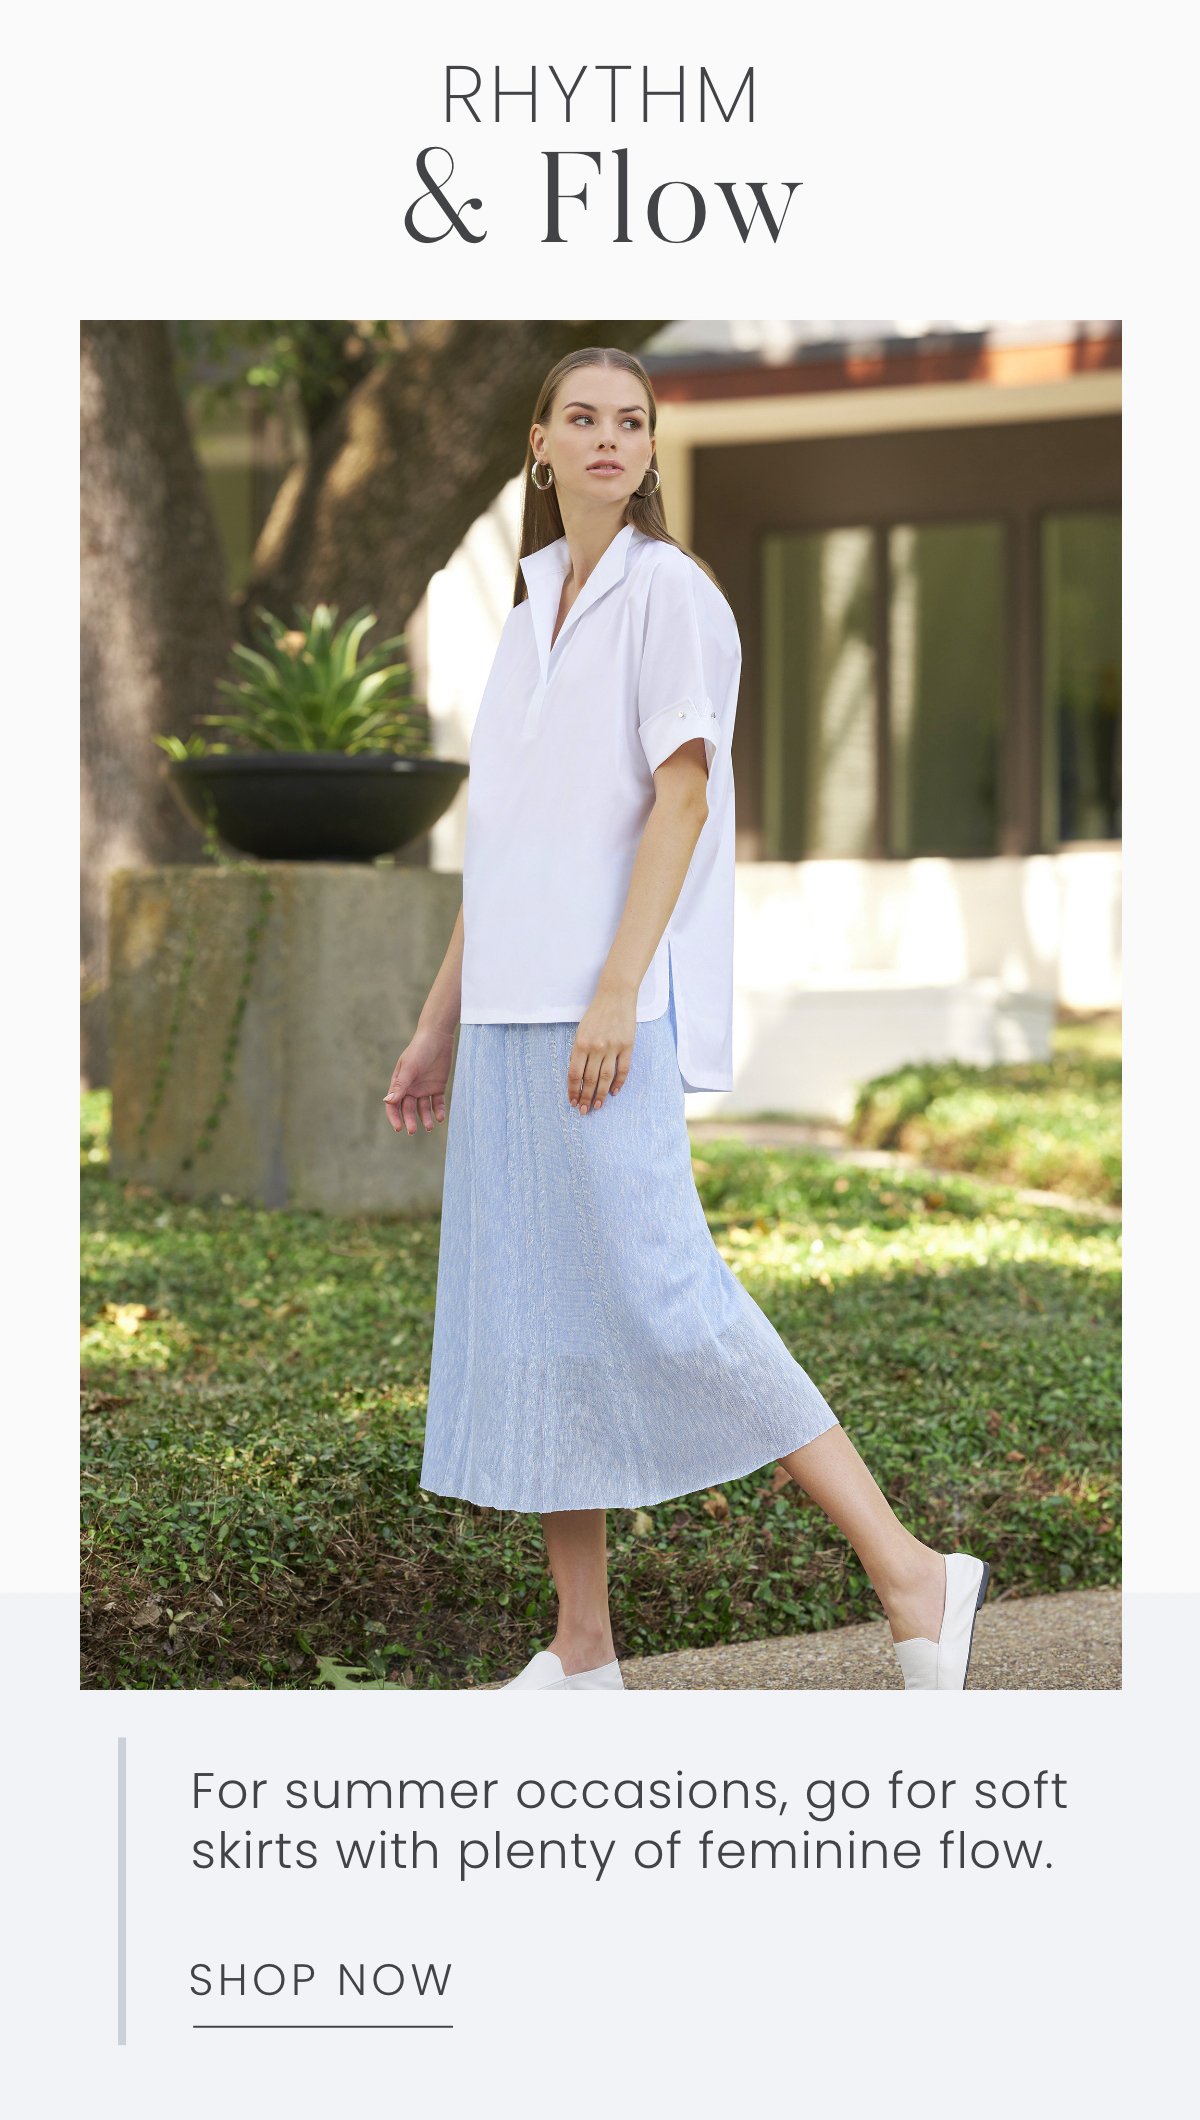 Rhythm & Flow - For summer occasions, go for soft skirts with plenty of feminine flow. Shop Now >>